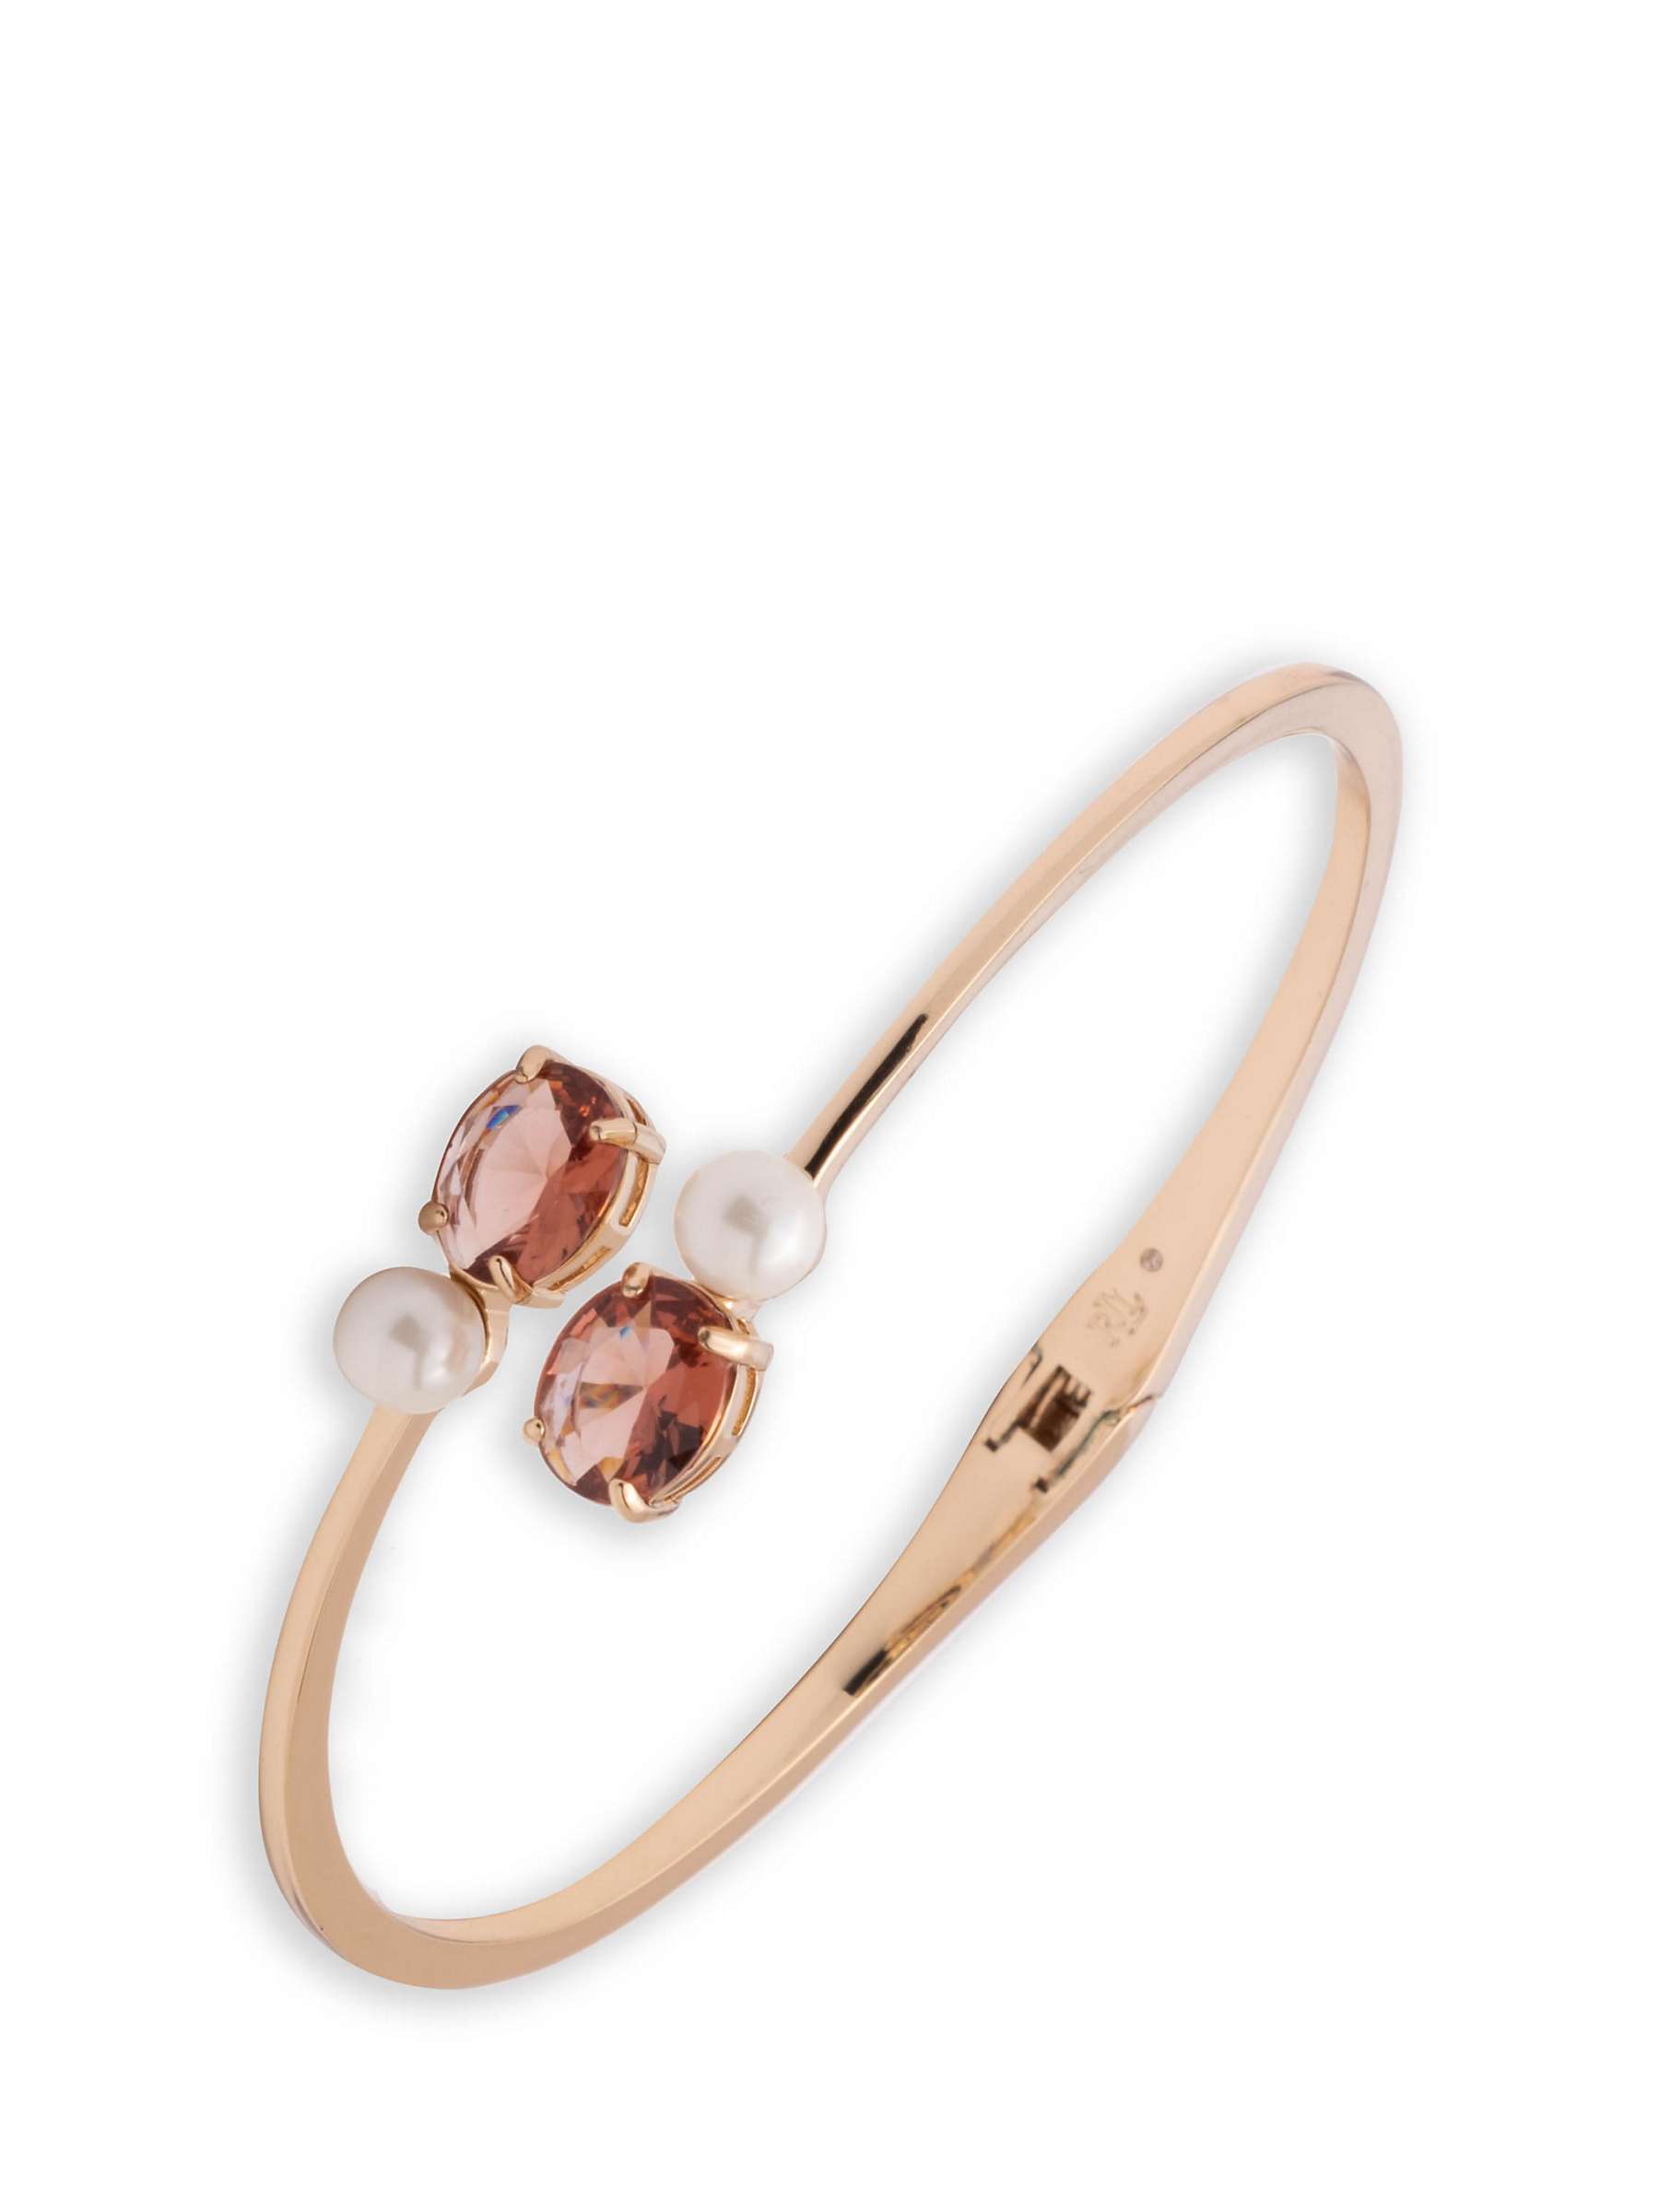 Buy Ralph Lauren Crystal and Faux Pearl Bangle, Gold/Pink Online at johnlewis.com